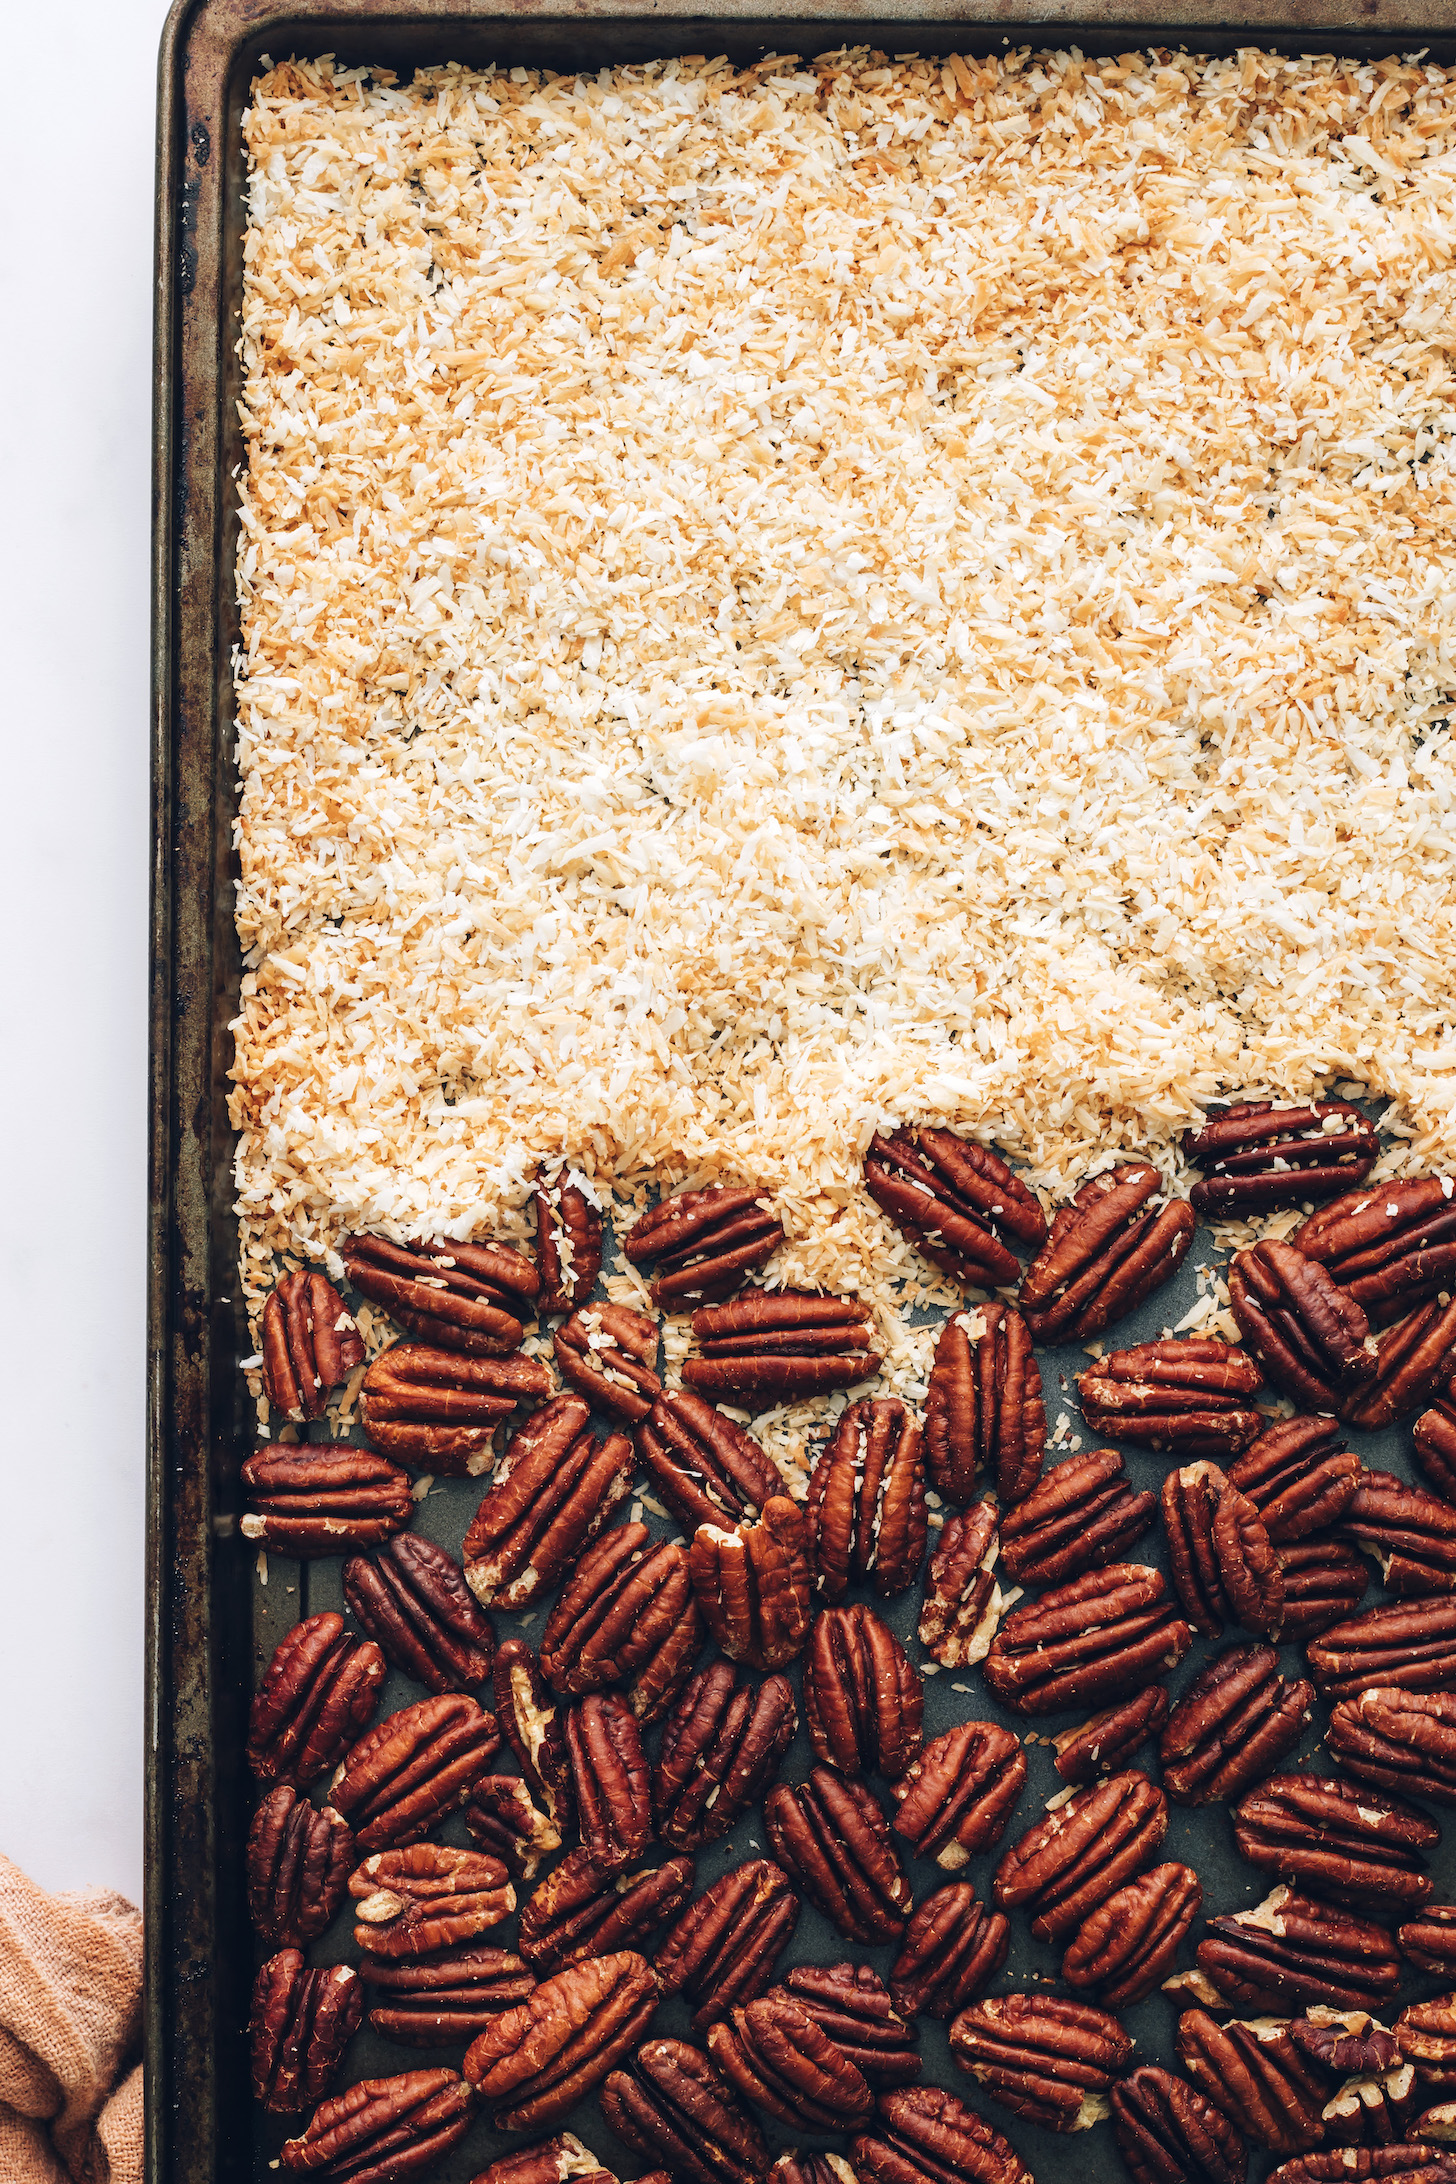 Toasted pecans and coconut on a baking sheet